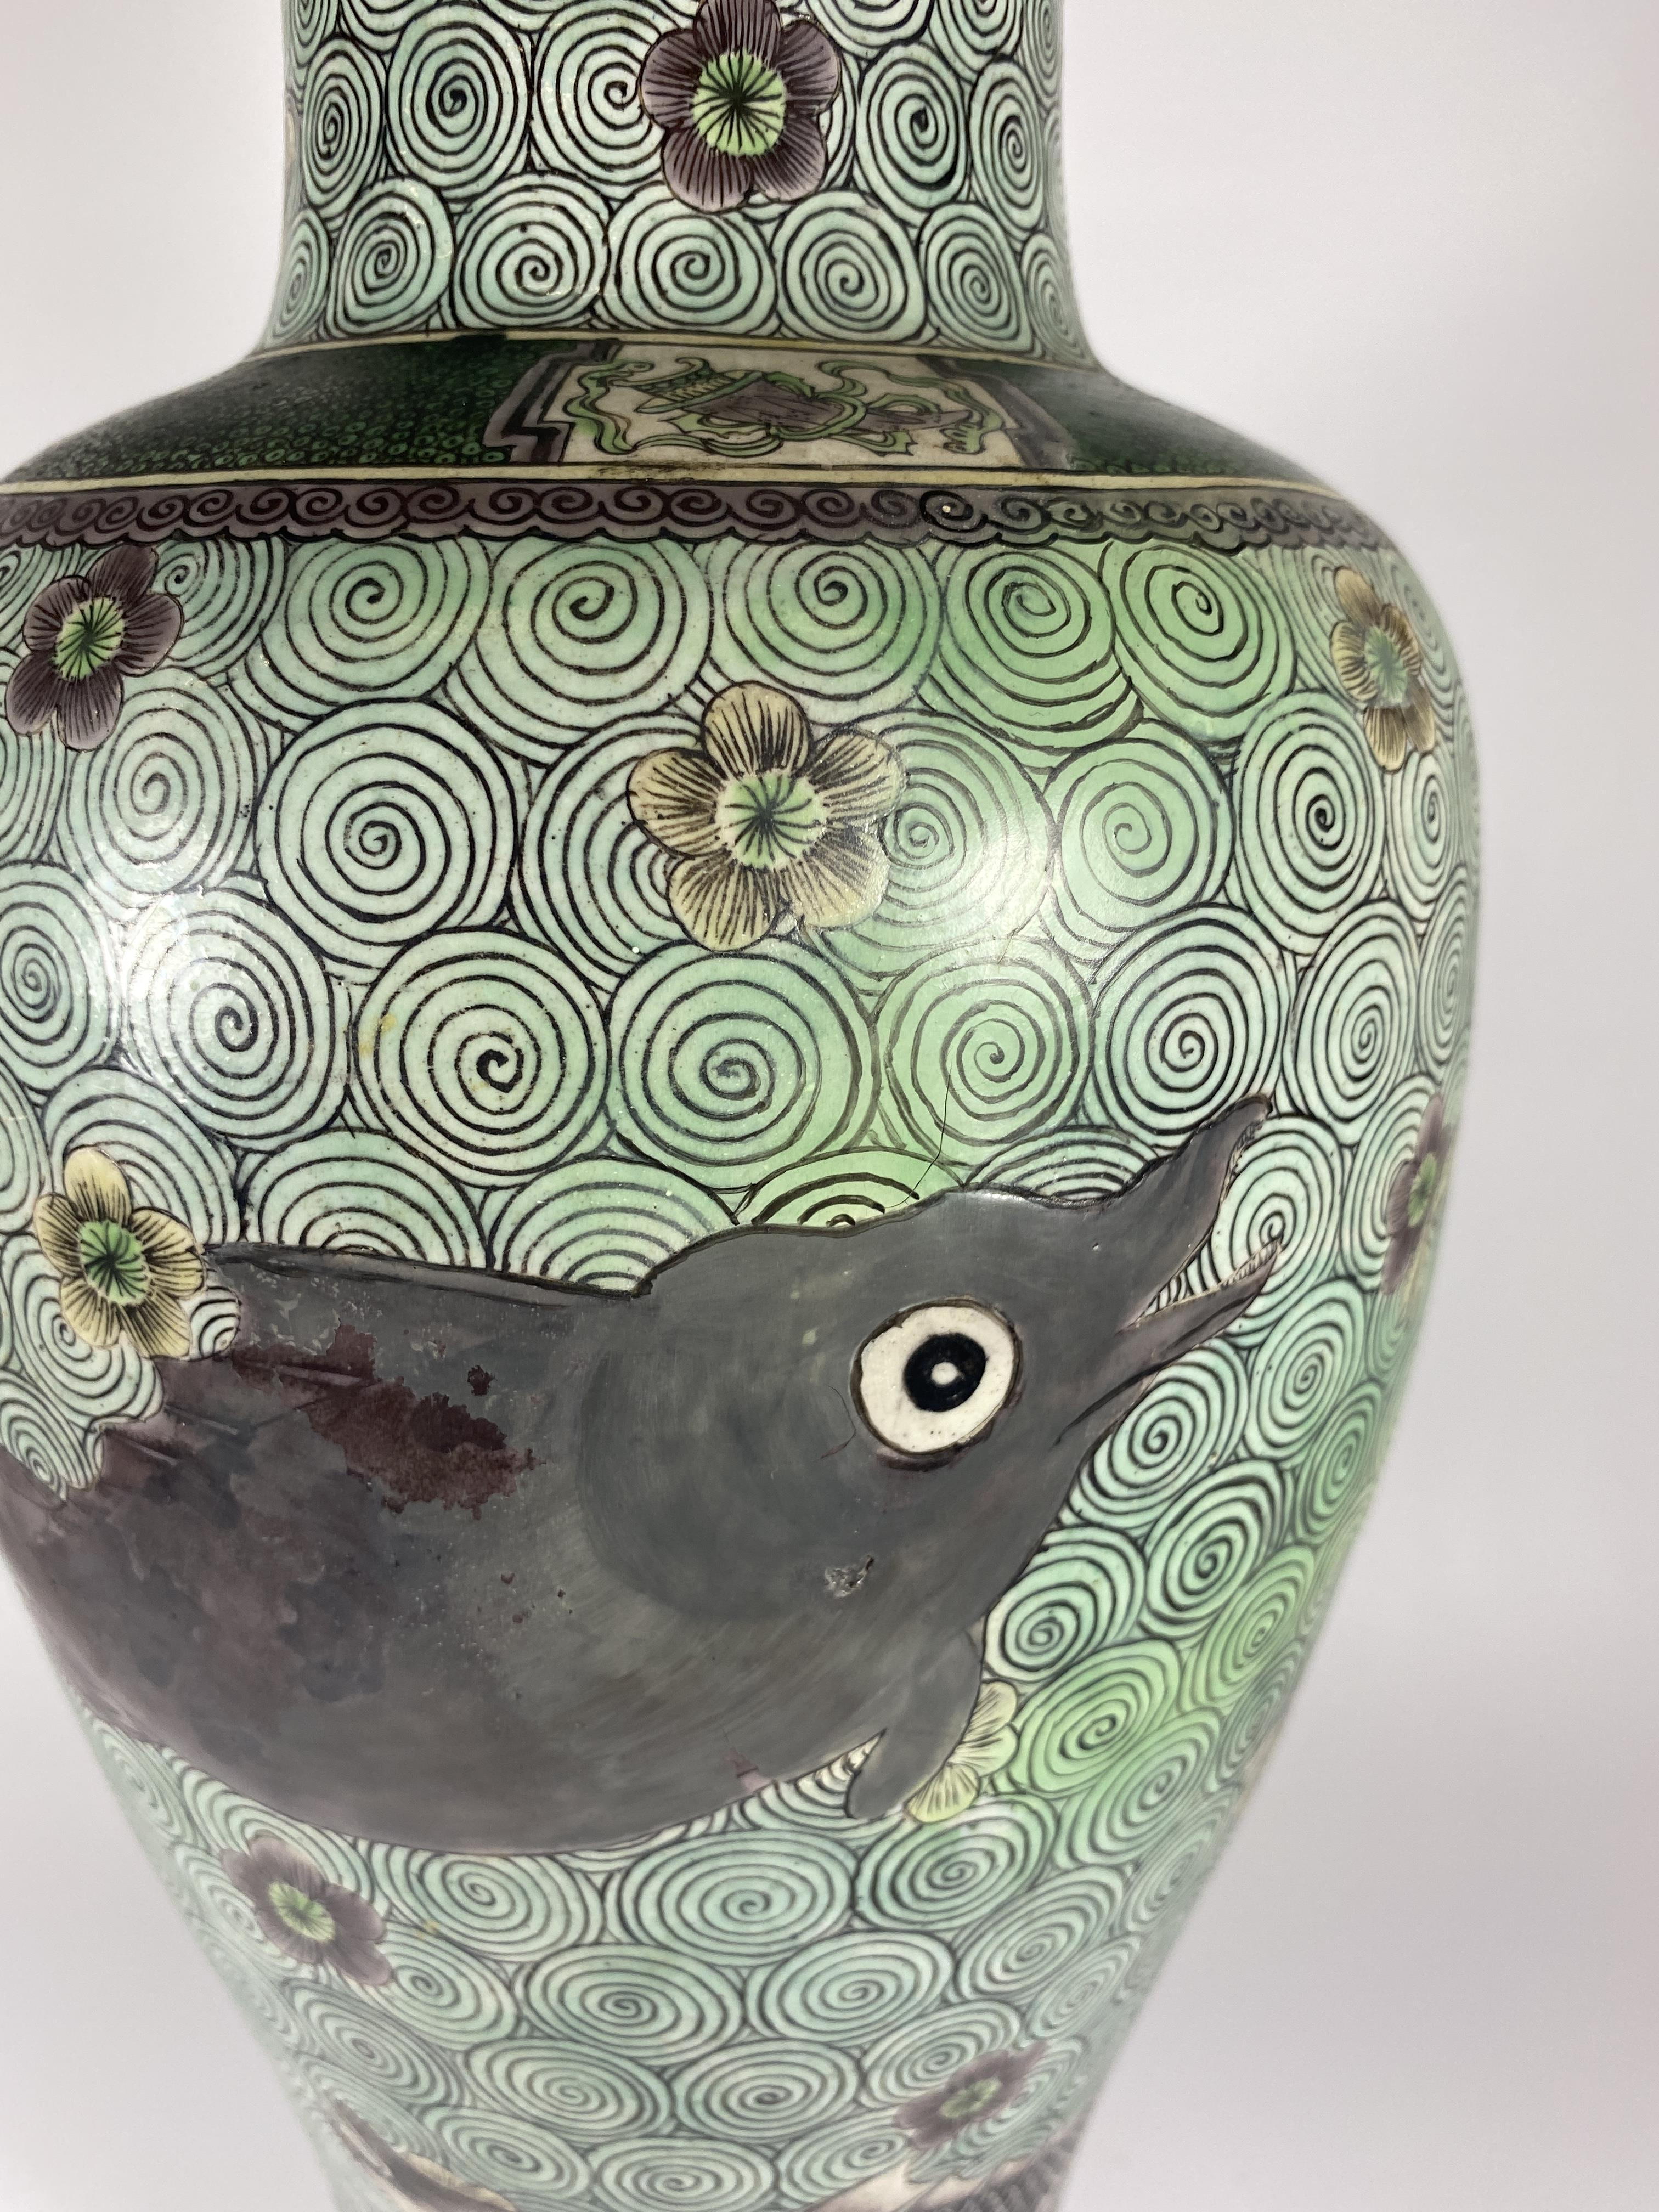 A LARGE MID 19TH CENTURY CHINESE BALUSTER FORM VASE WITH ENAMEL FISH ON A GEOMETRIC CIRCLES - Image 6 of 9